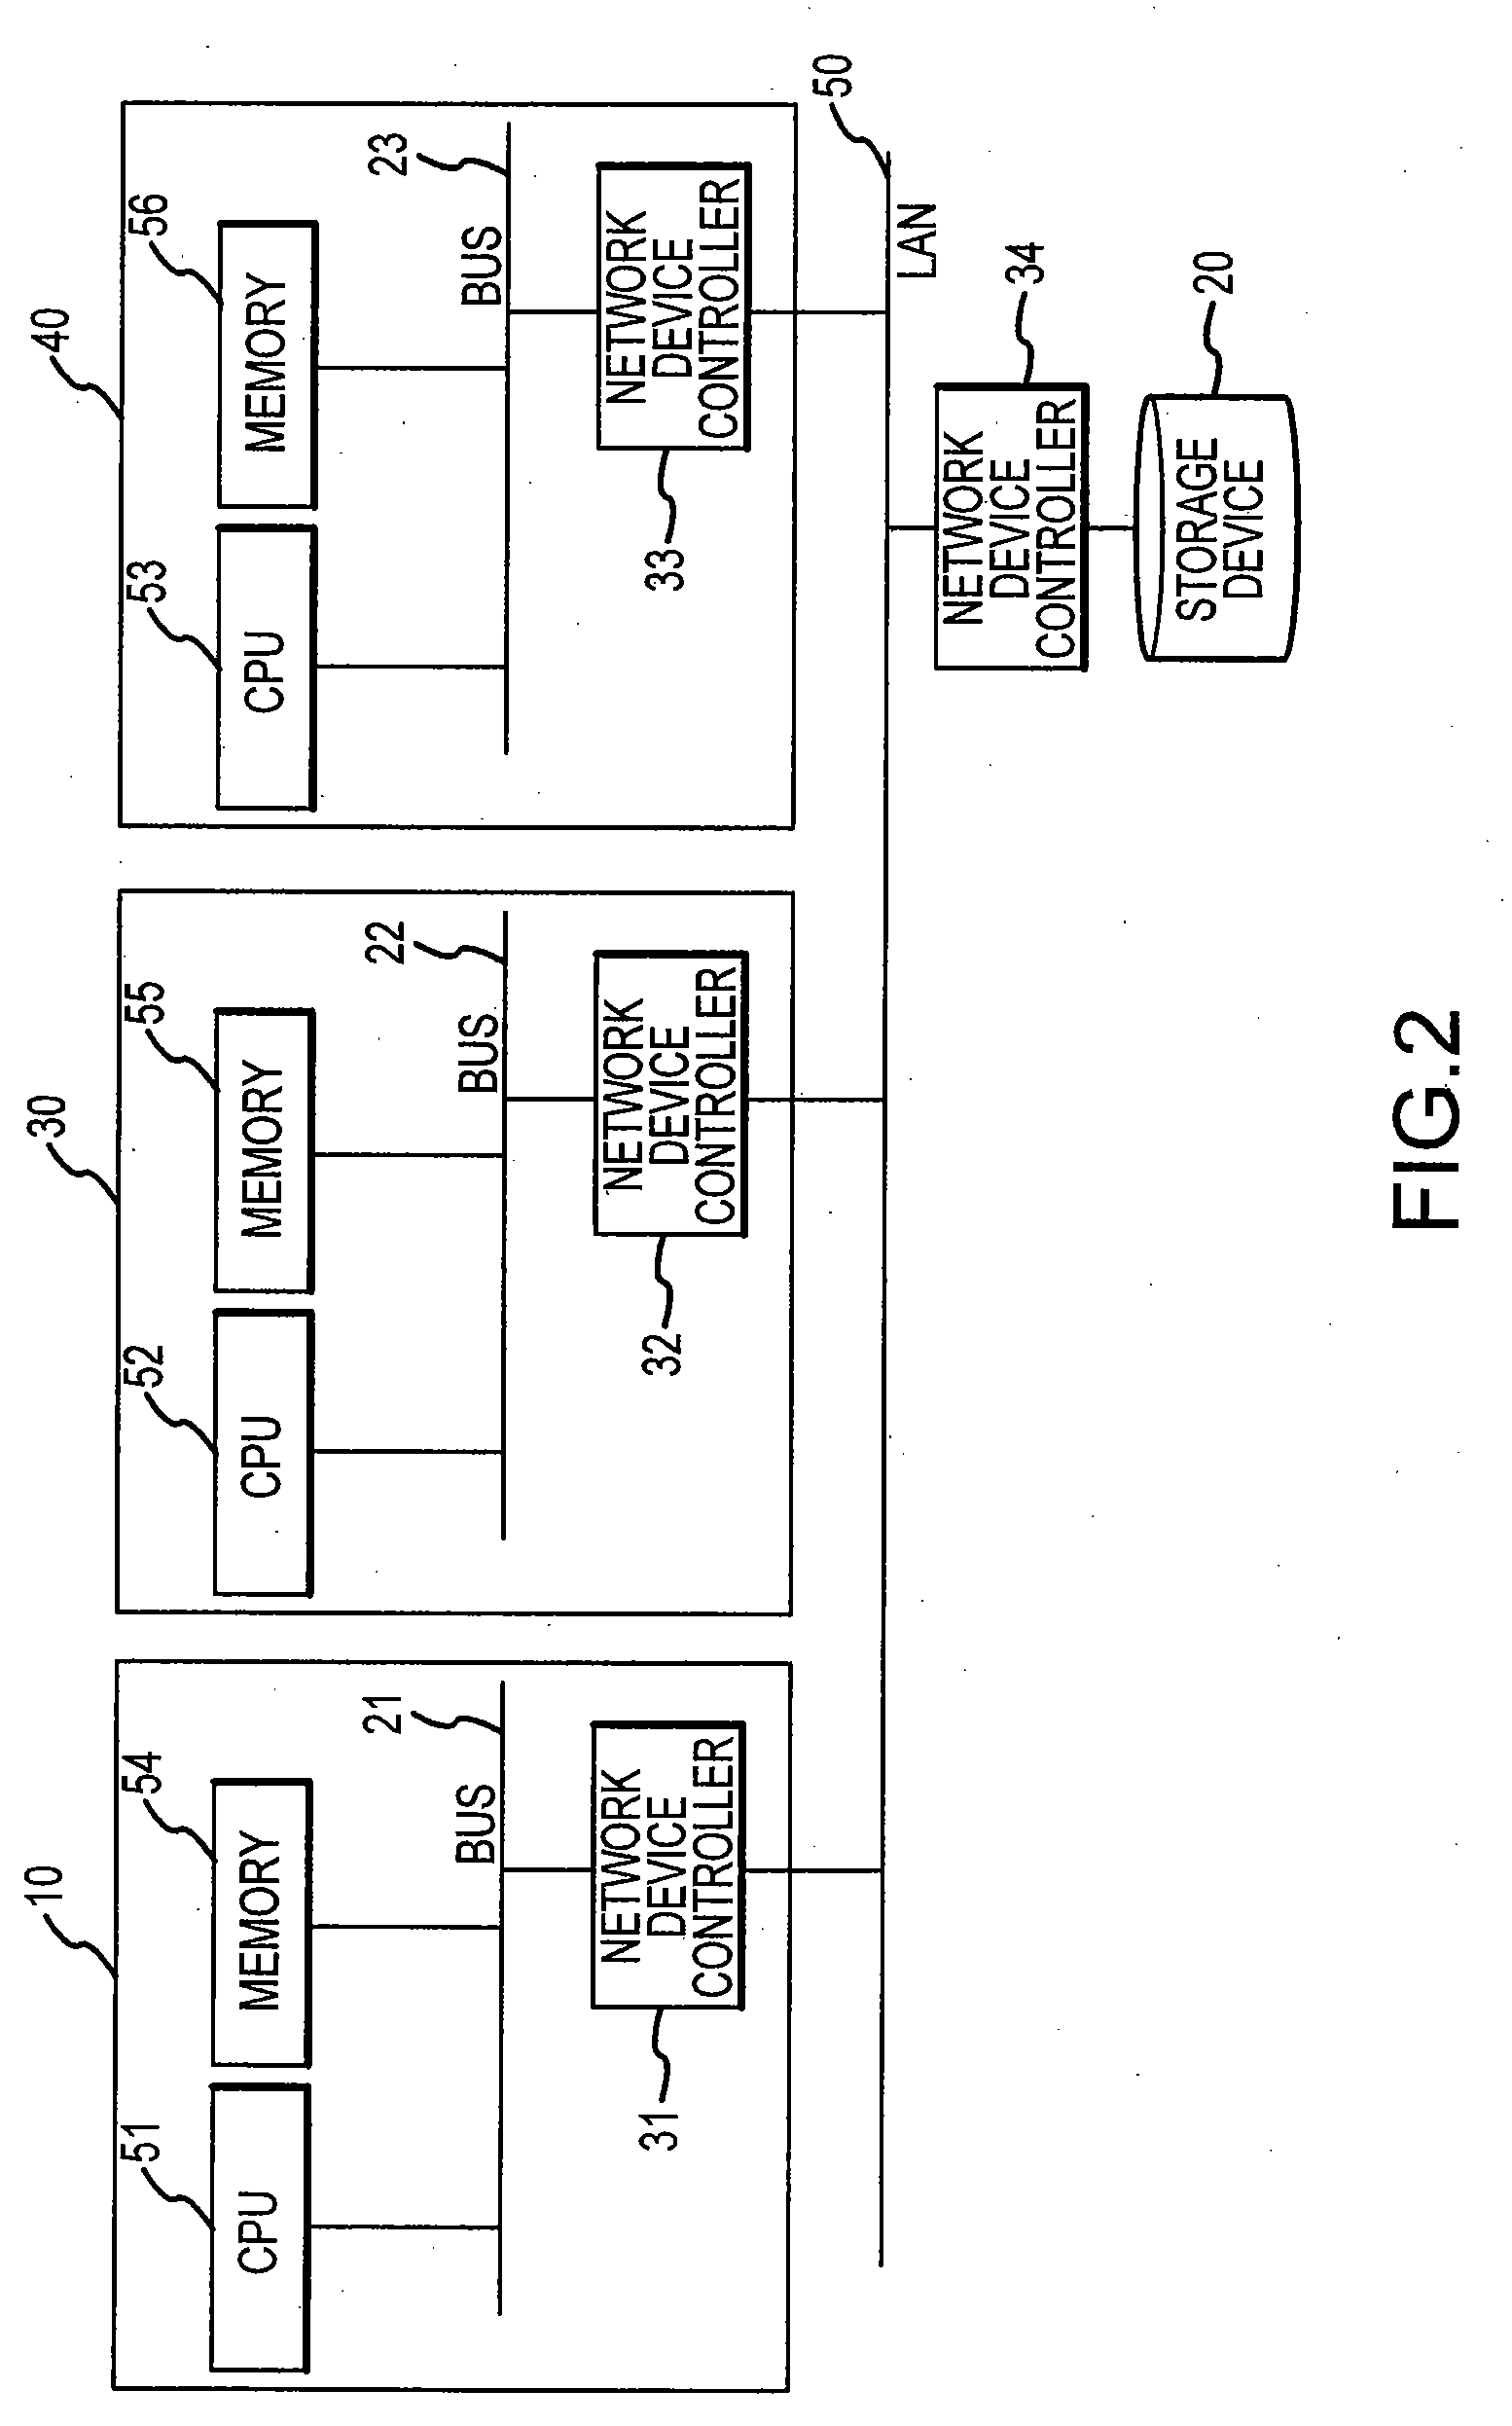 Data integrity for data storage devices shared by multiple hosts via a network